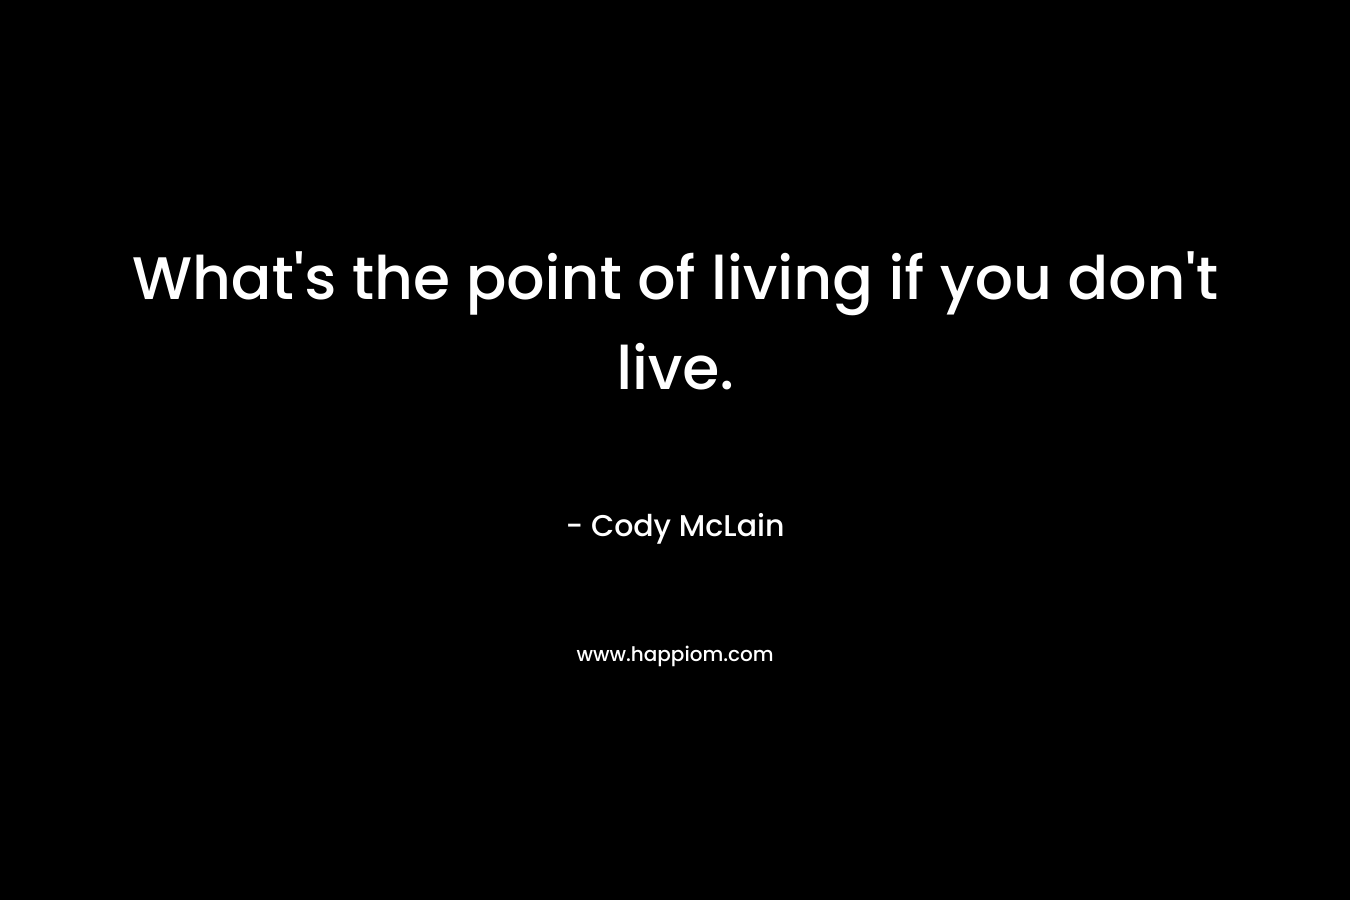 What's the point of living if you don't live.